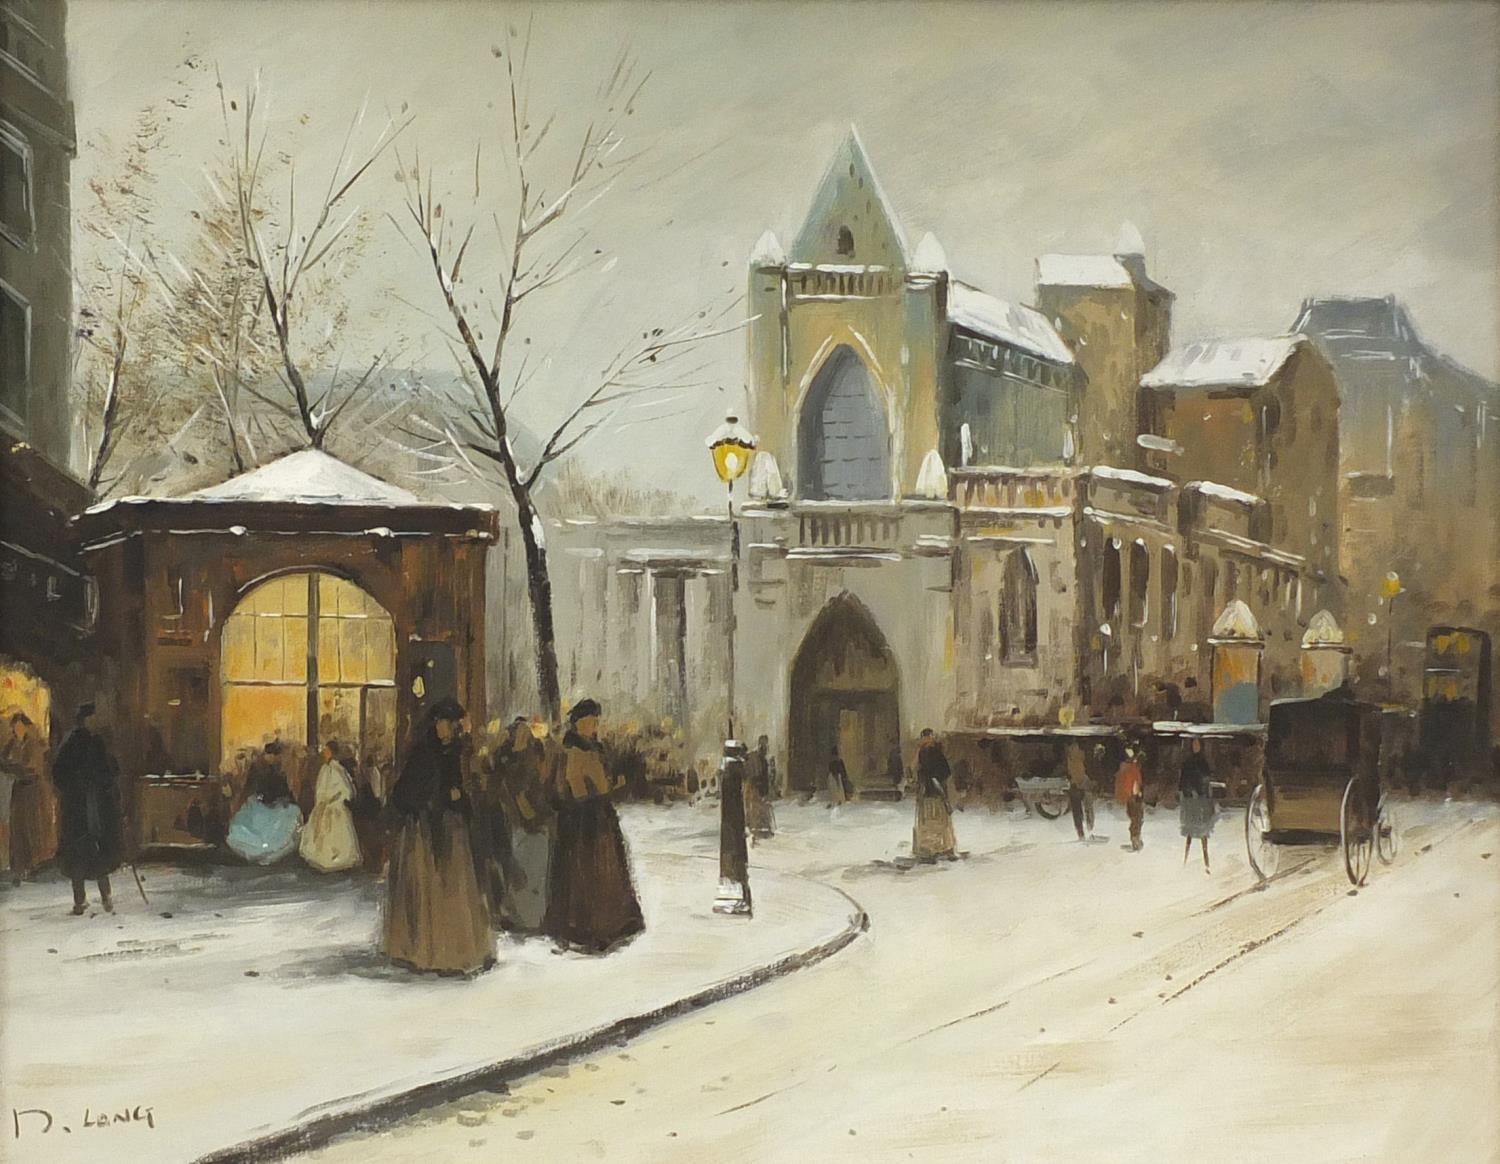 D. Long - Victorian snowy street scene, oil onto canvas, framed, 50cm x 40cm : For Further Condition